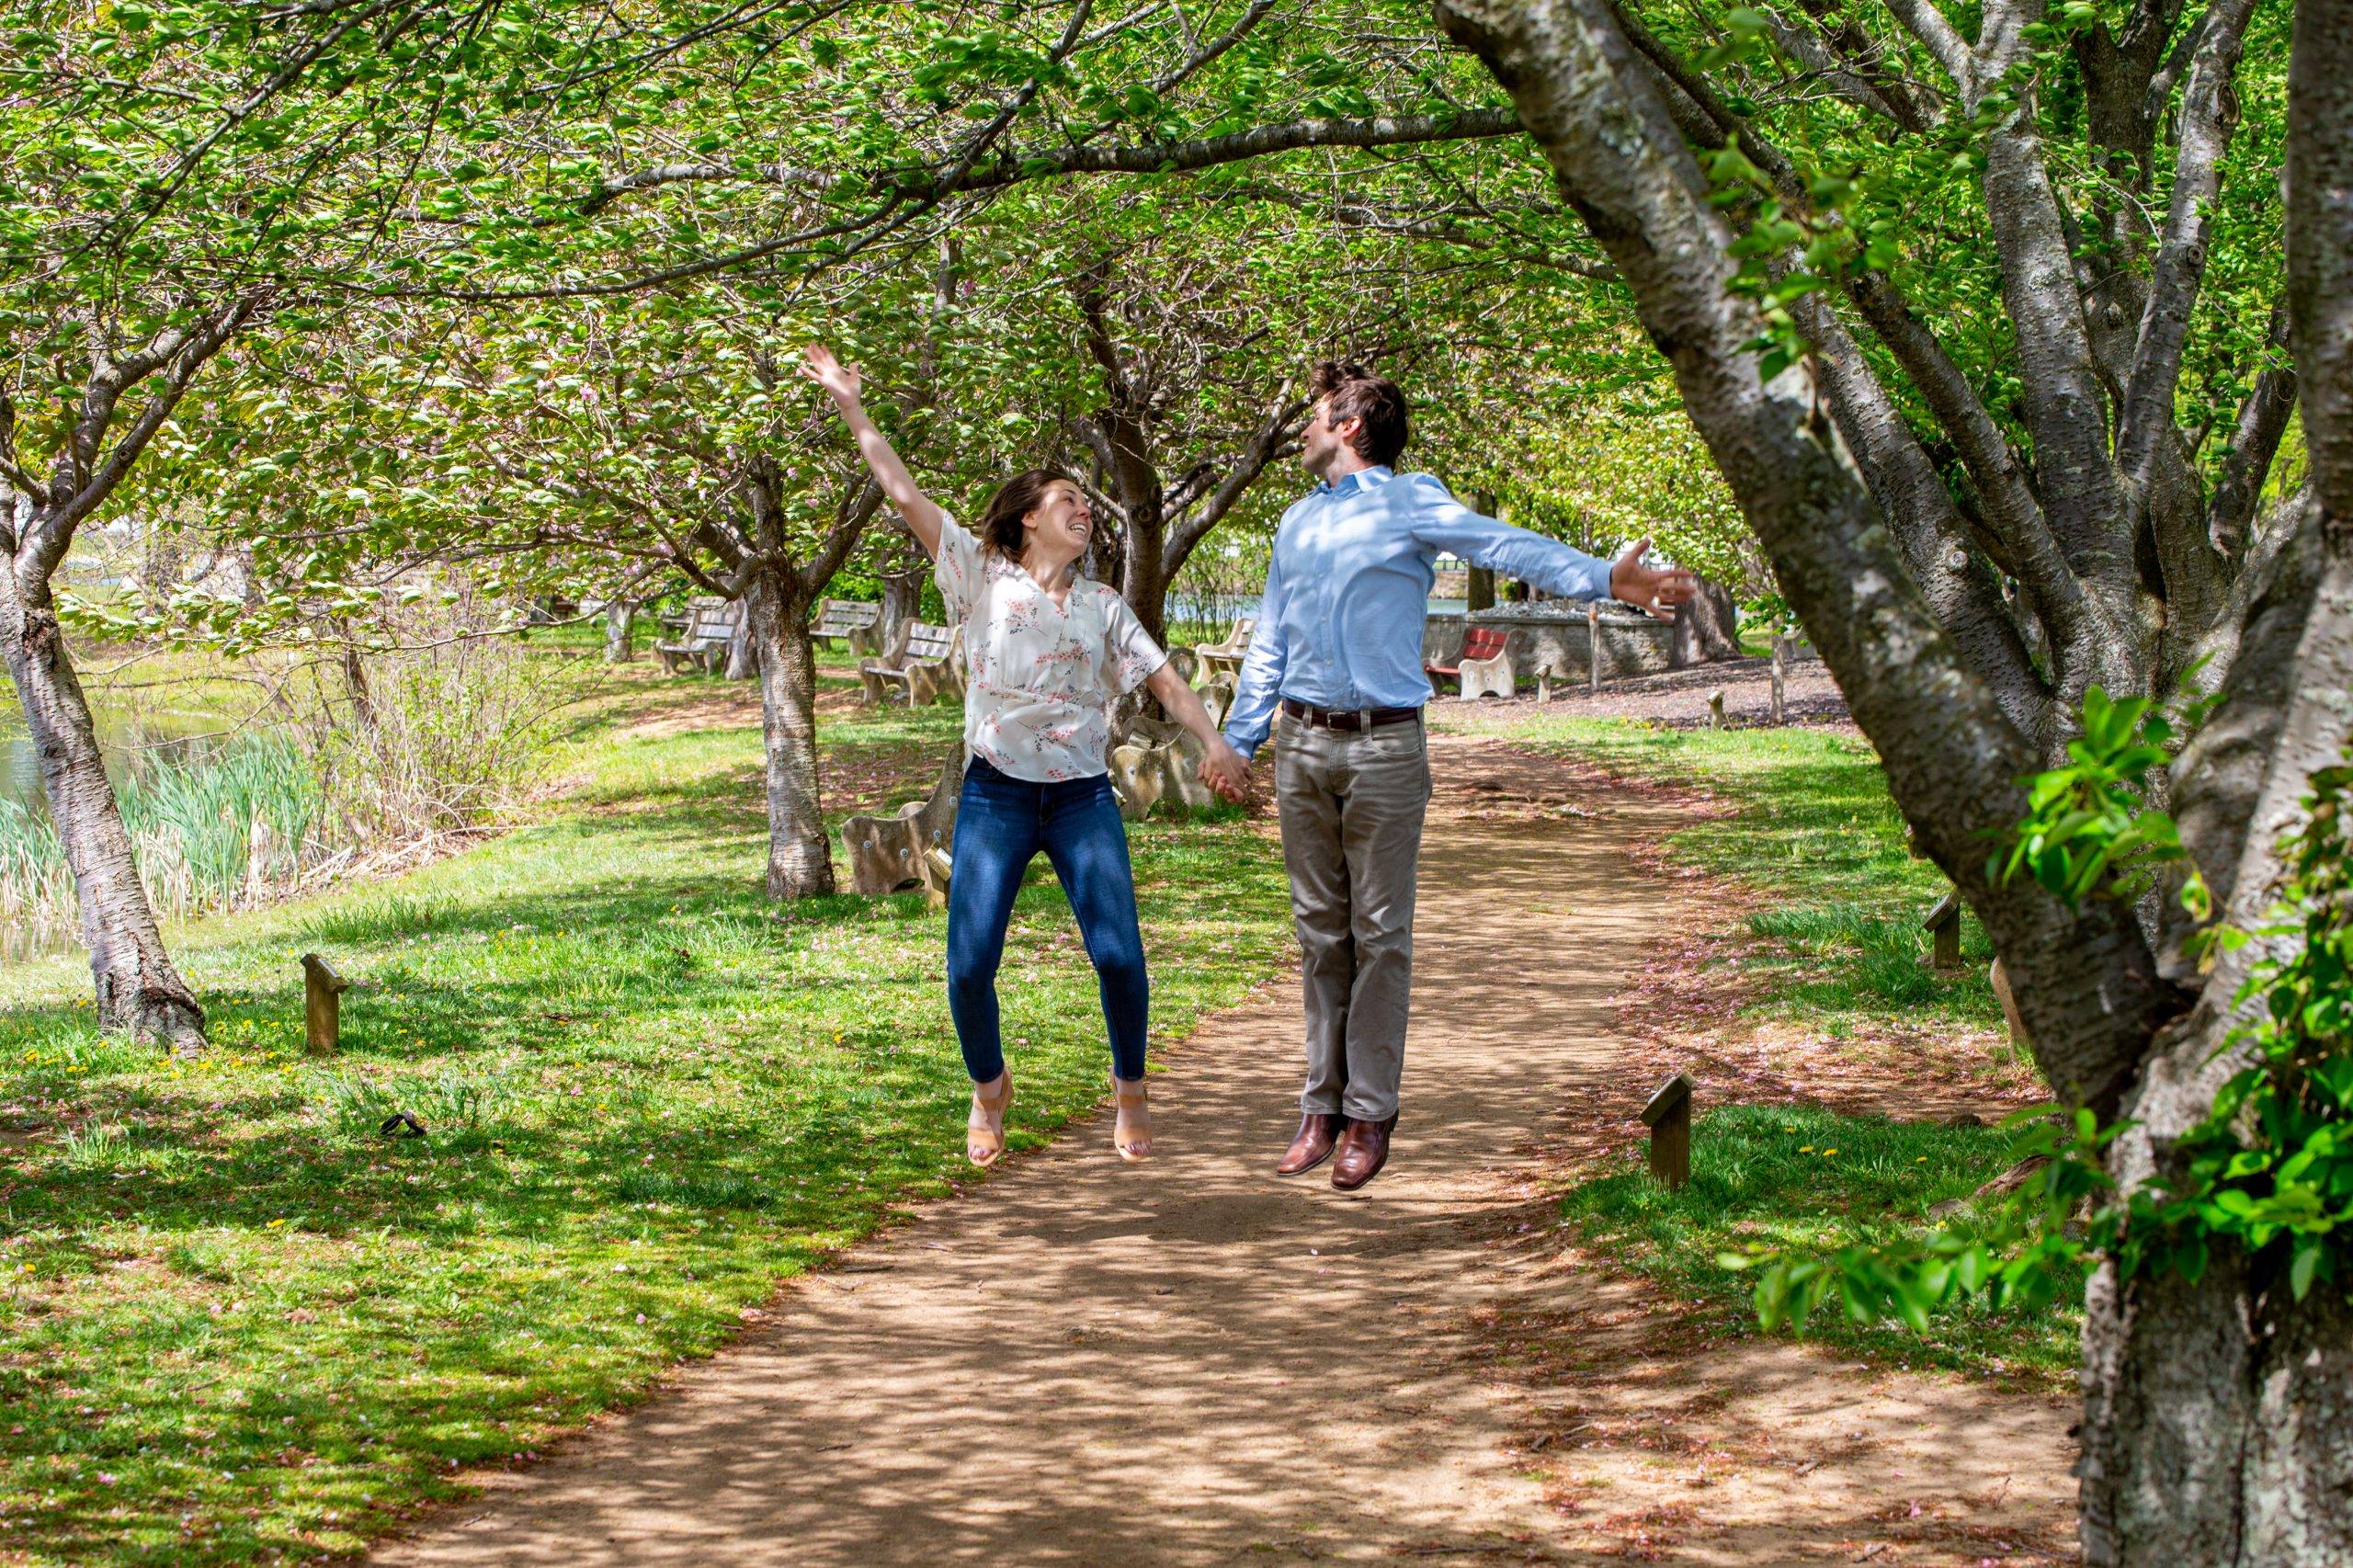 A couple jumping in the air on a path in a park.